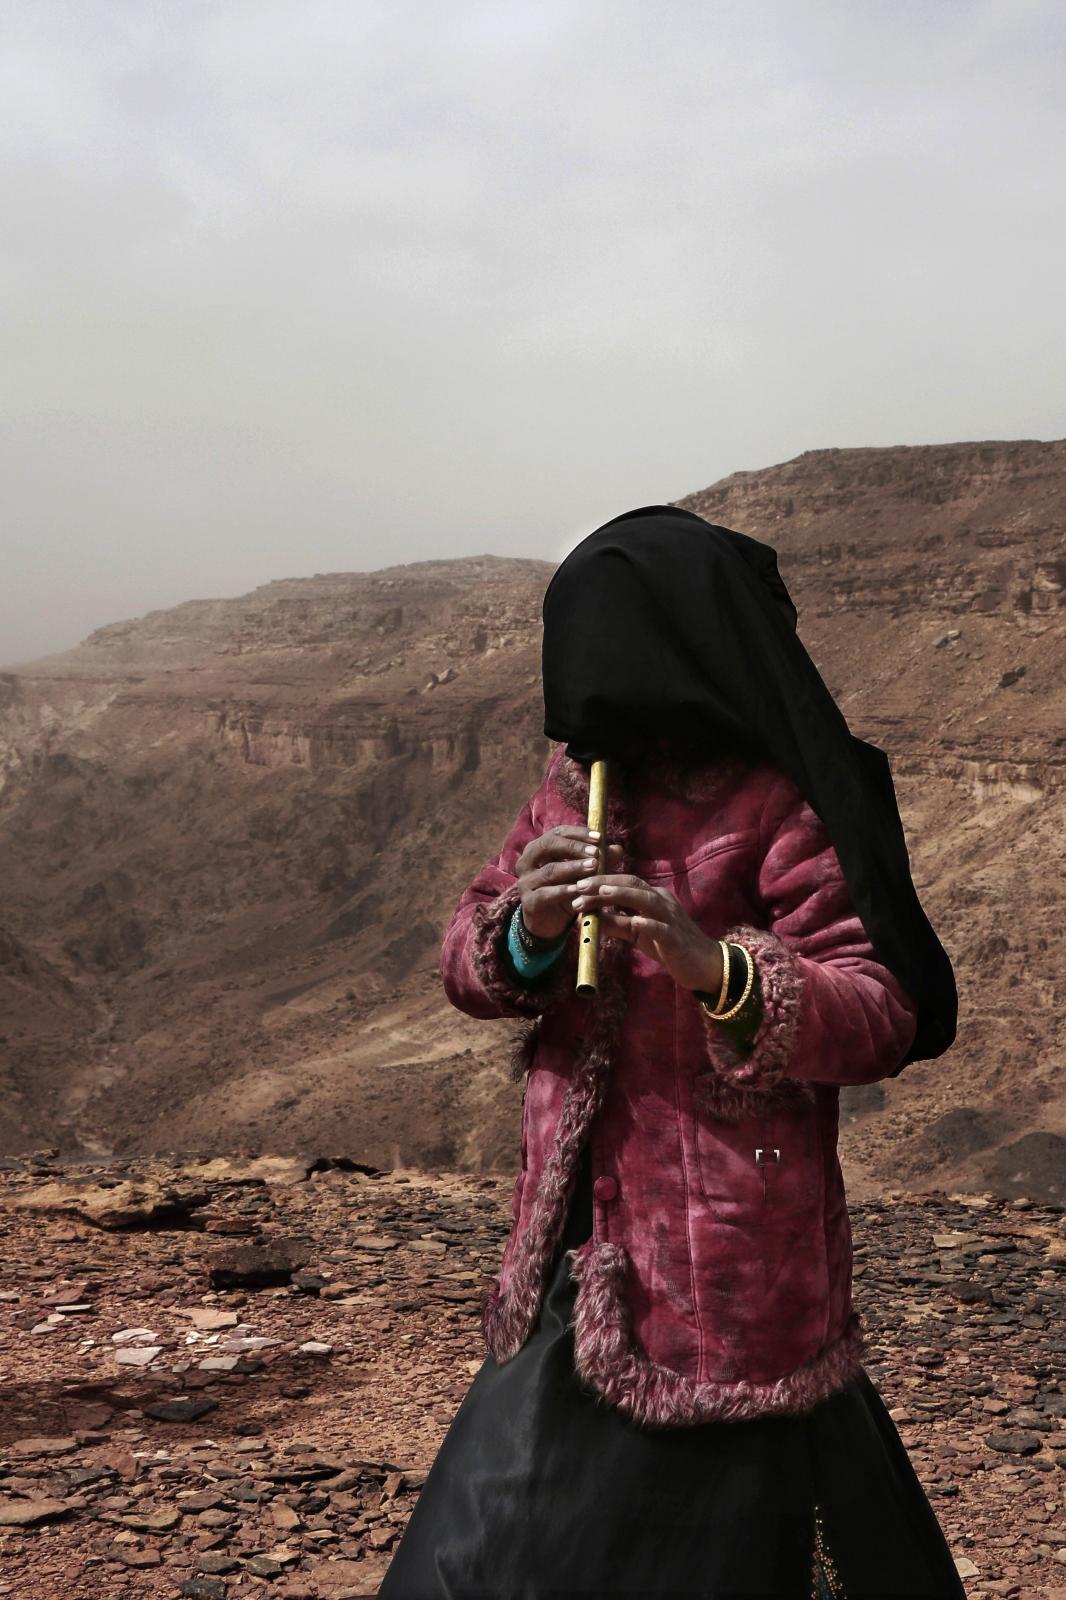 Aicha, from the Hamada tribe and one of the first female guides, plays the flute for tourists on a trek in the mountains.